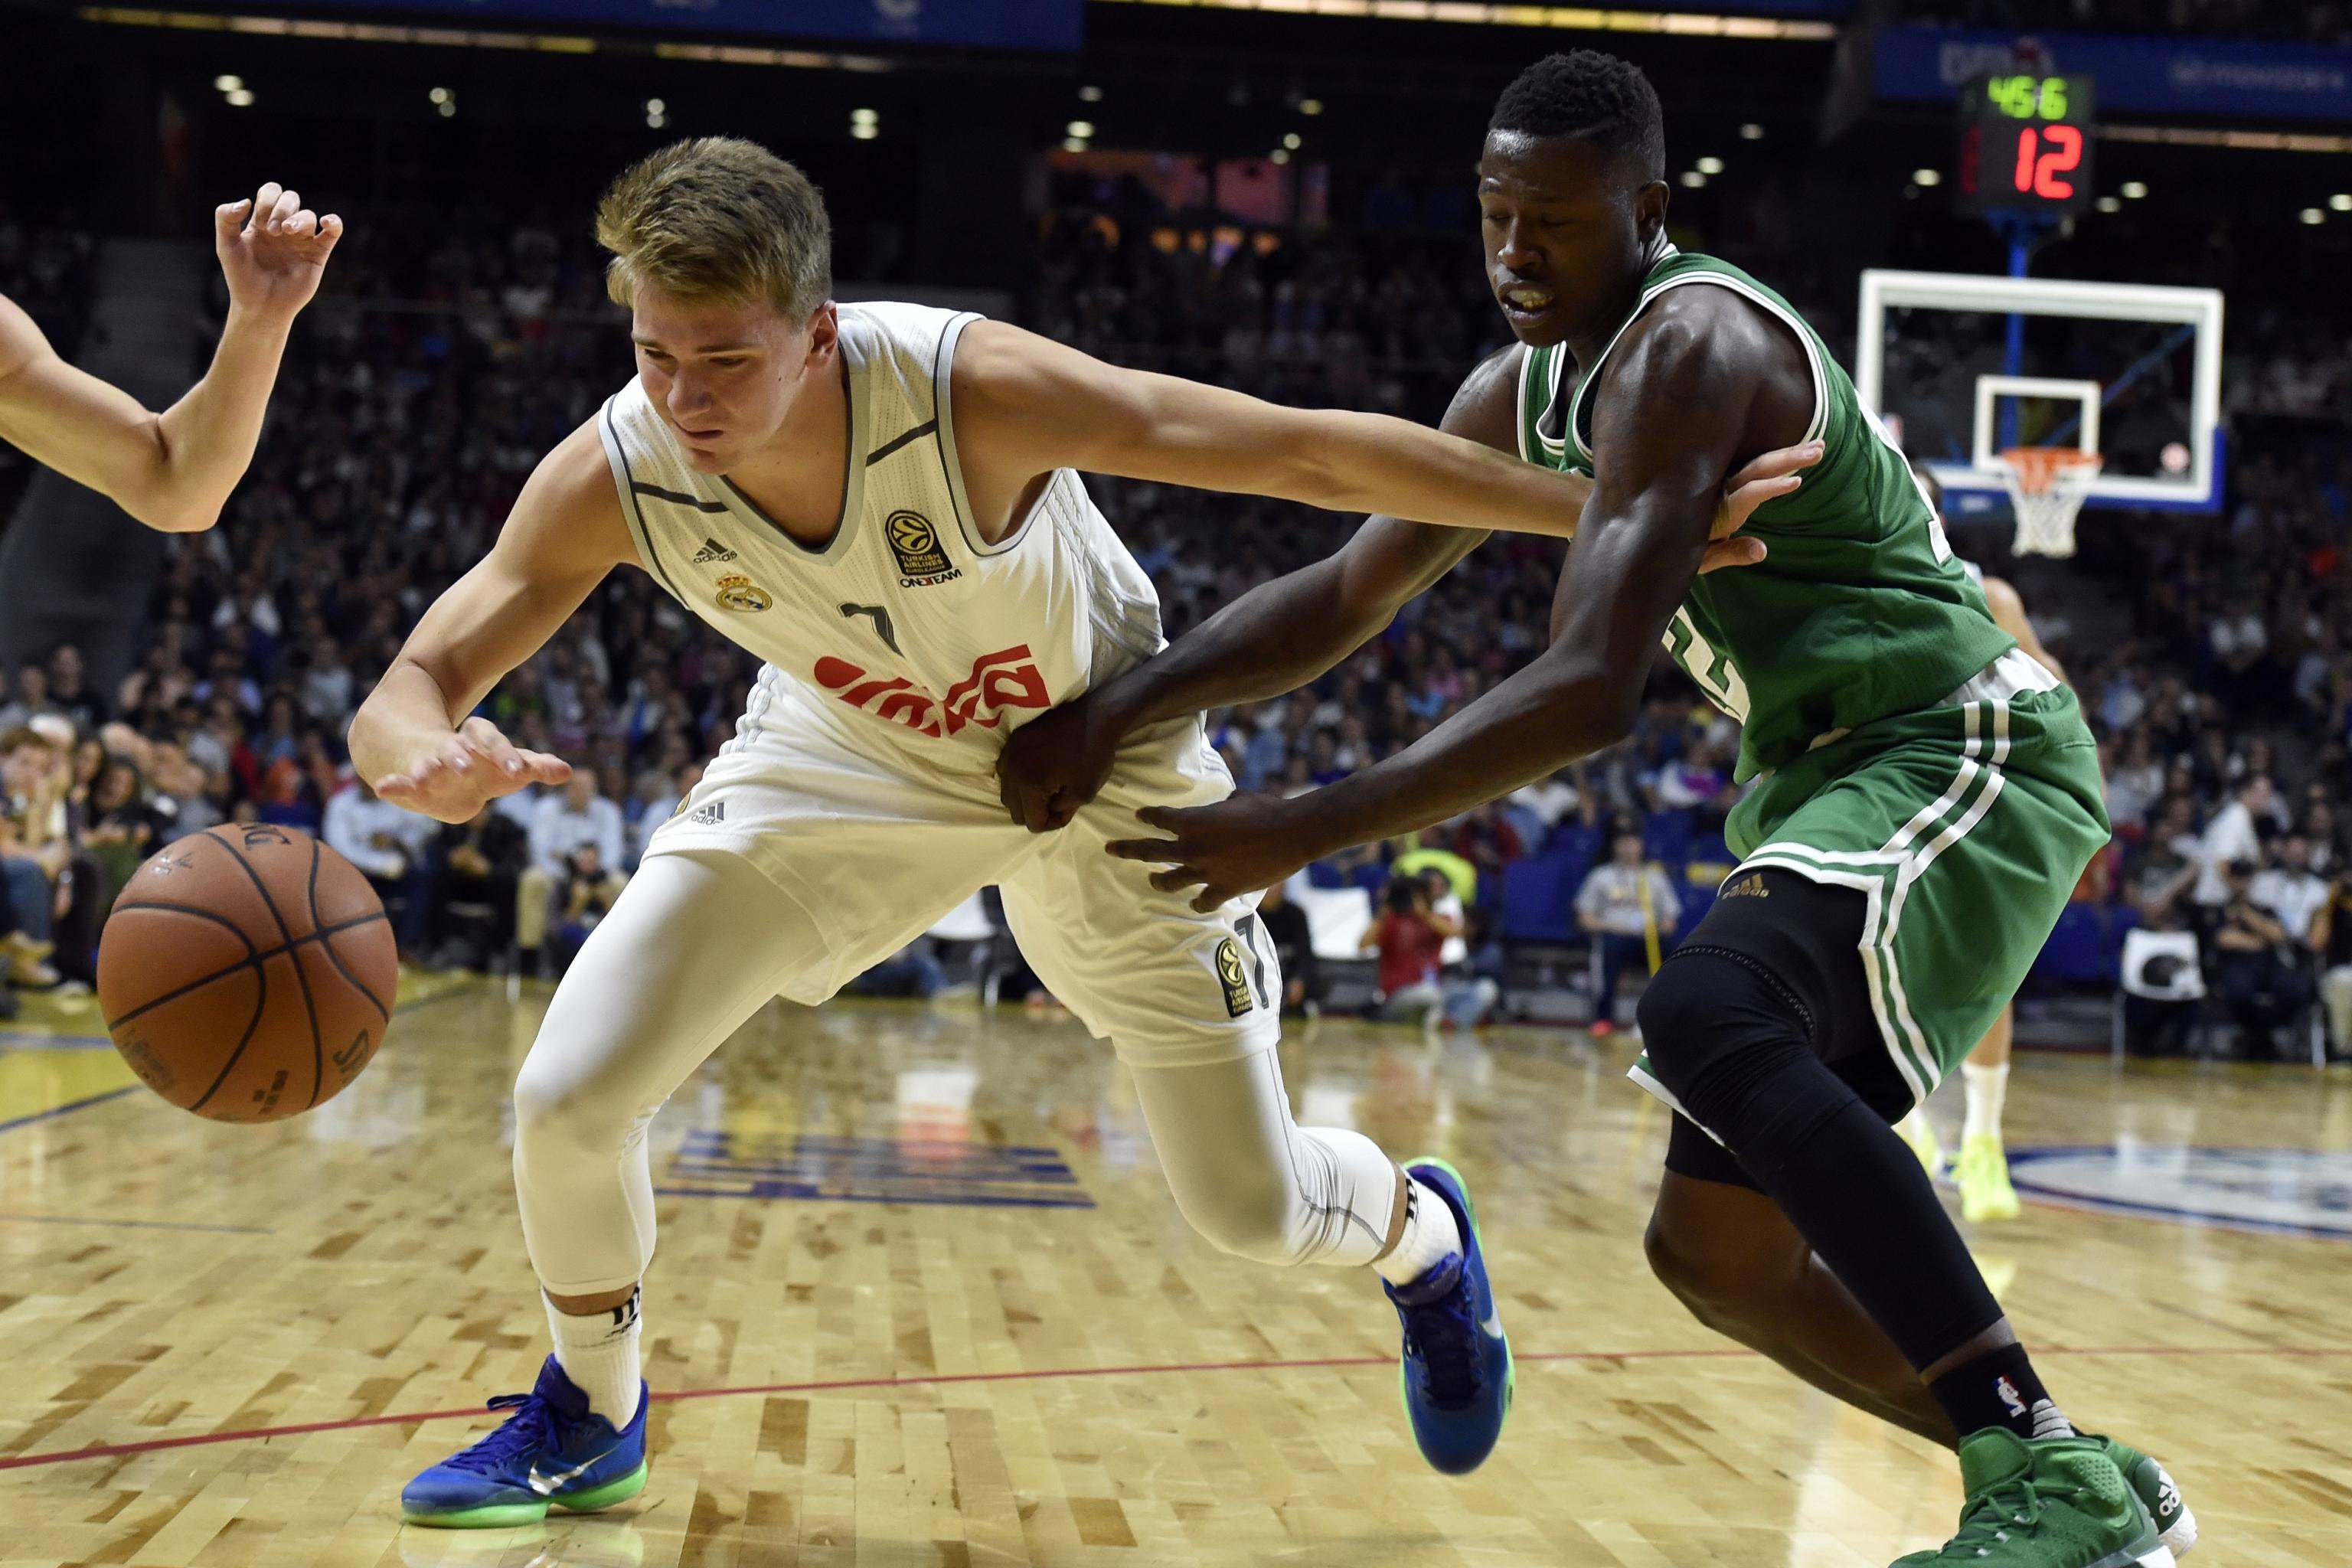 Luka Doncic may have been crowned as the next big thing prematurely